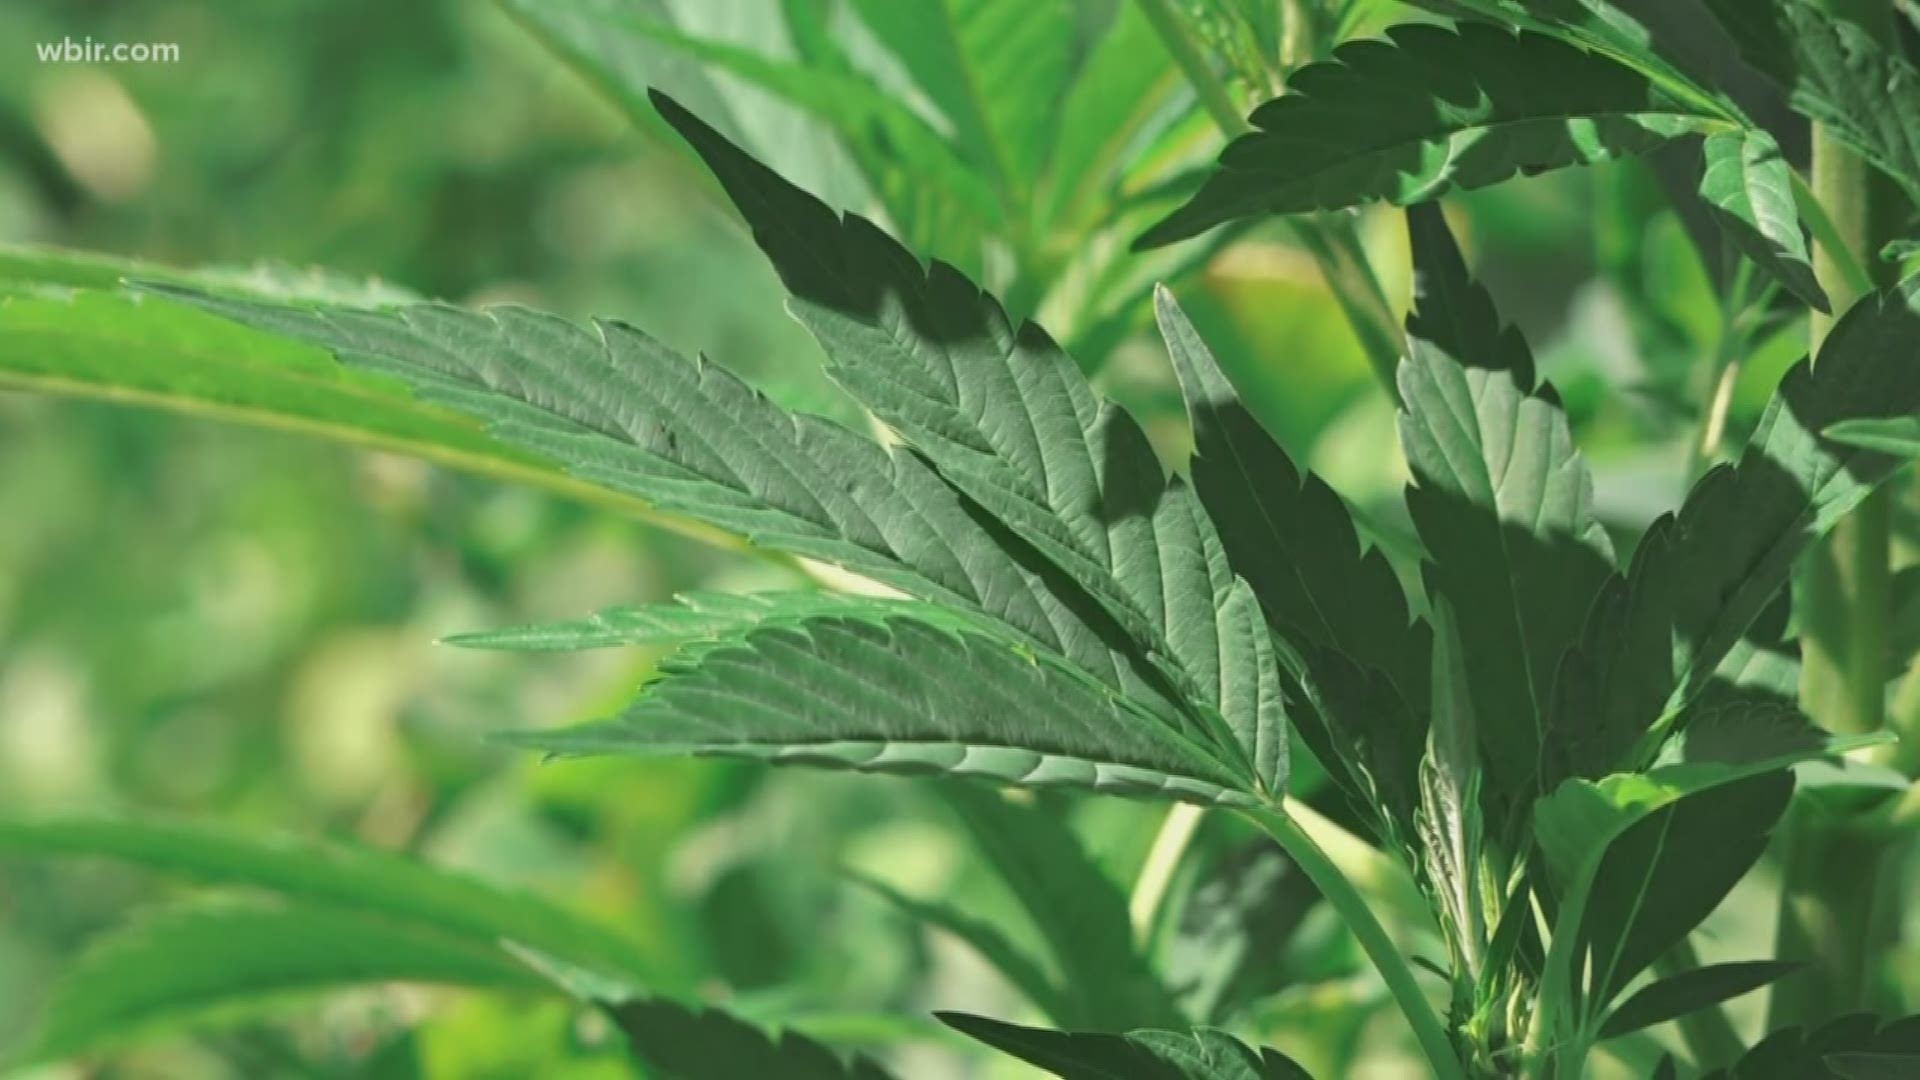 The University of Tennessee is working on hemp production research with a Knoxville business.